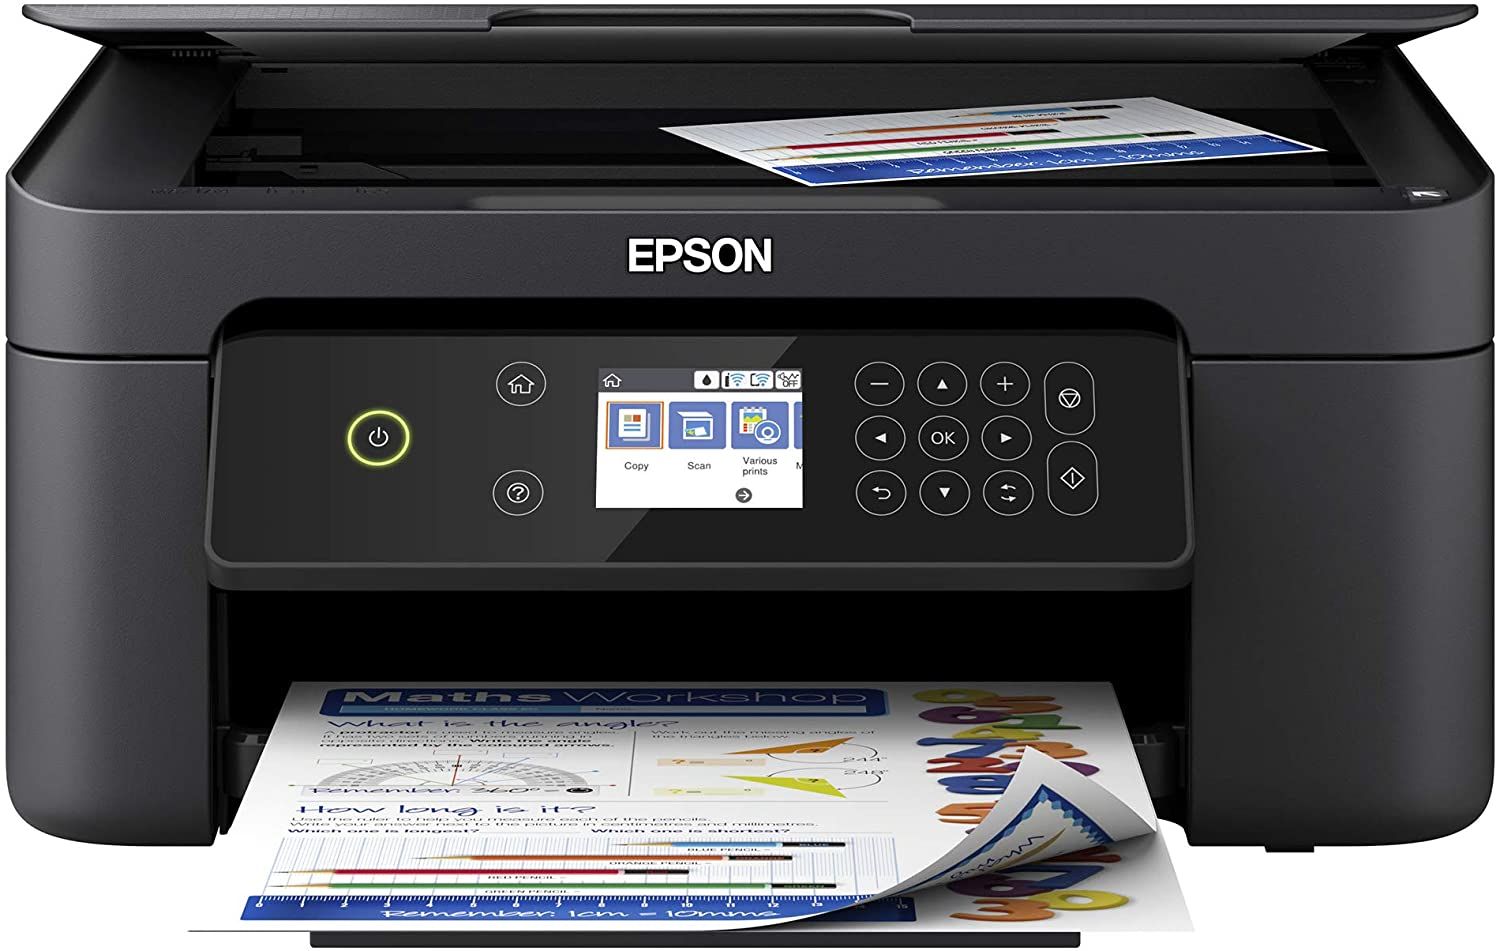 Epson Expression XP-4105 printing colored reports